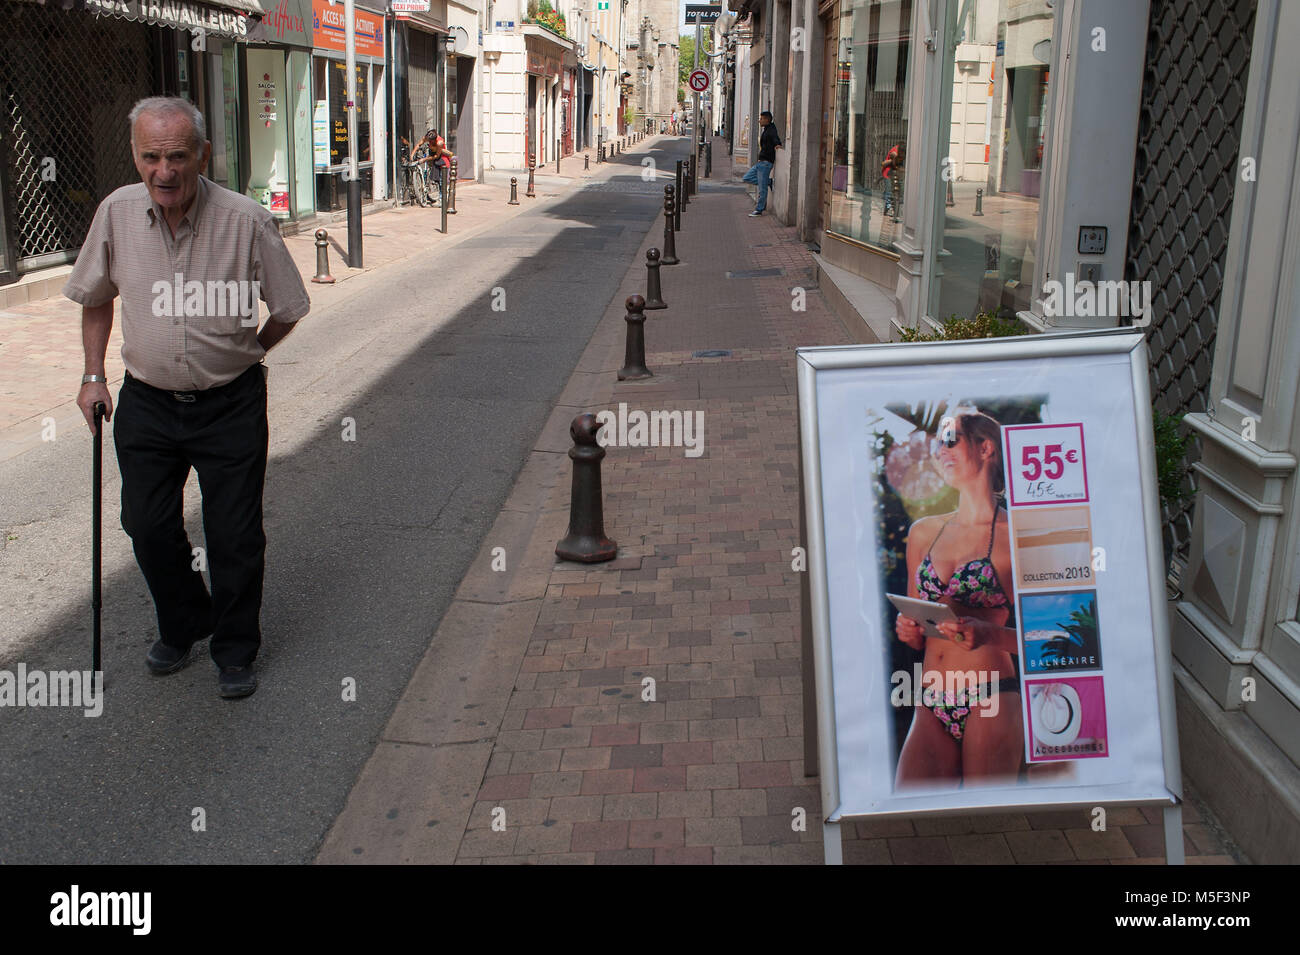 Carcassonne, France. Old man with stick and advertising of female swimsuits for women. Stock Photo